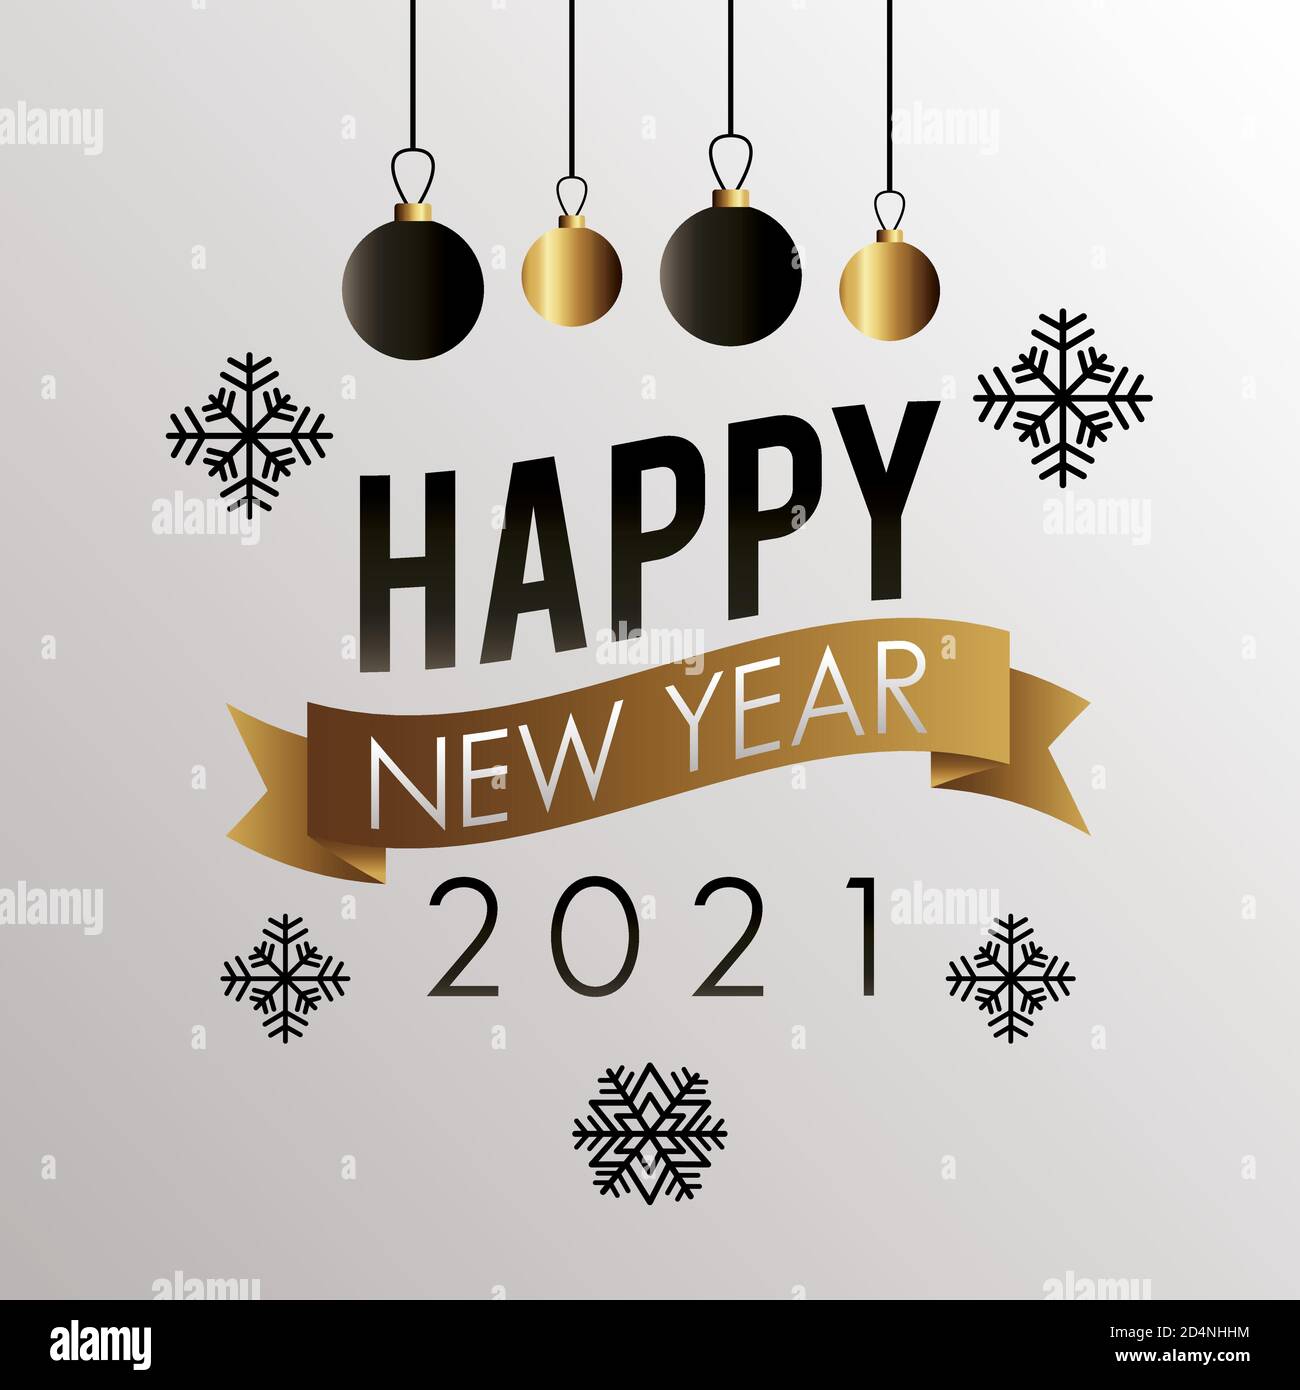 happy new year 2021 lettering with golden balls hanging and snowflakes vector illustration design Stock Vector